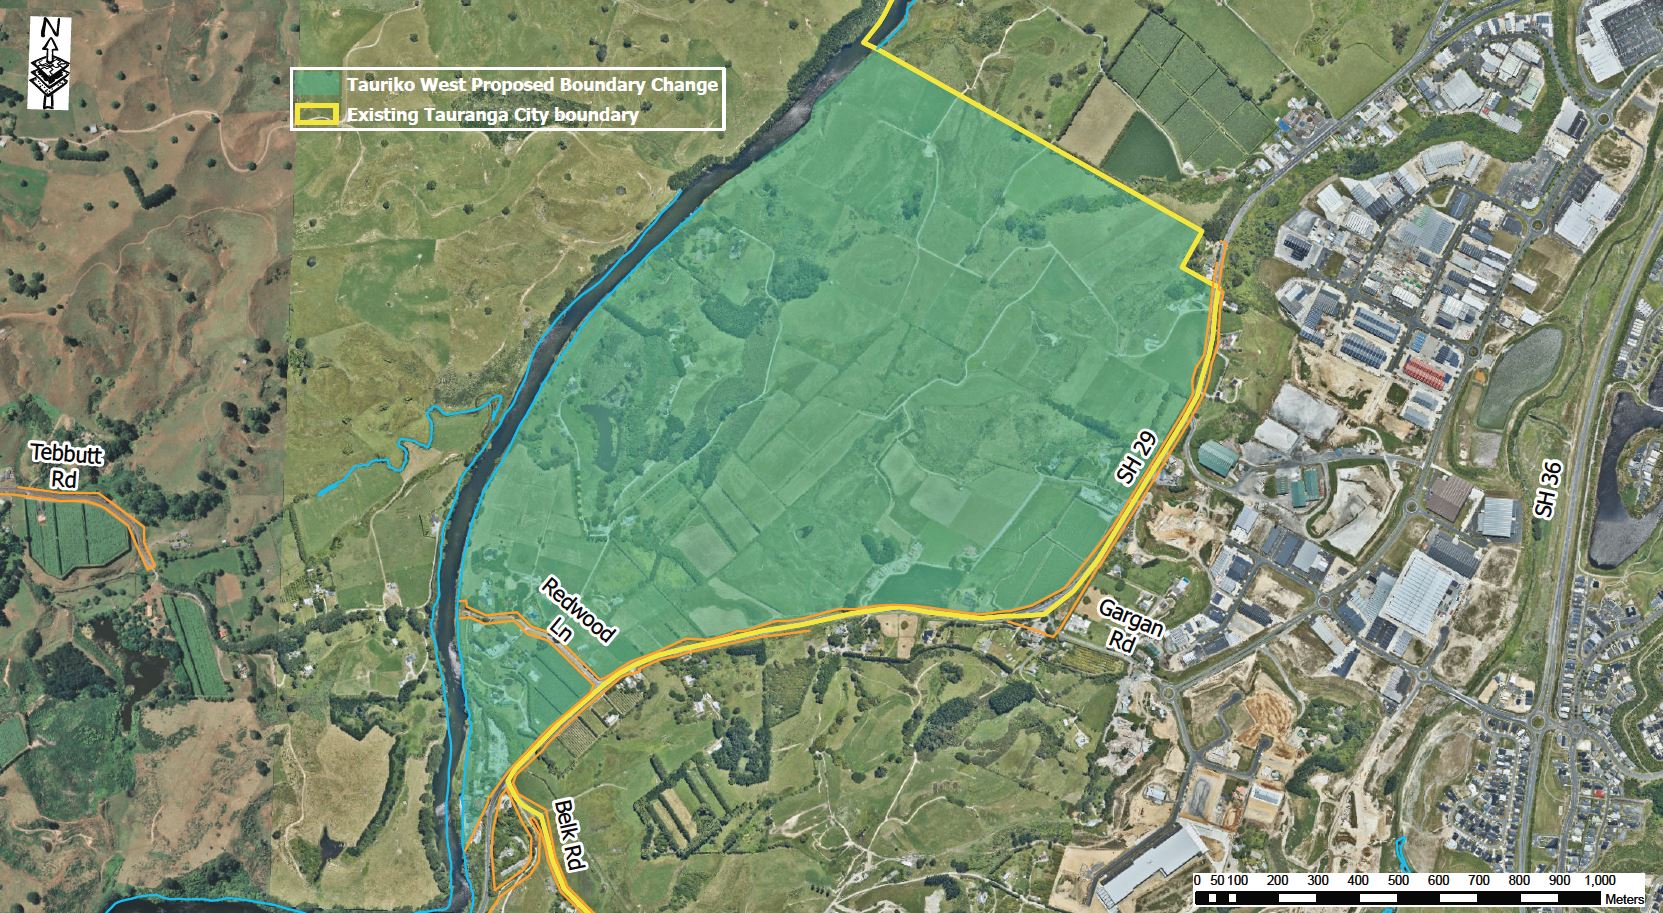 Map showing the Tauriko West Proposed Boundary Change